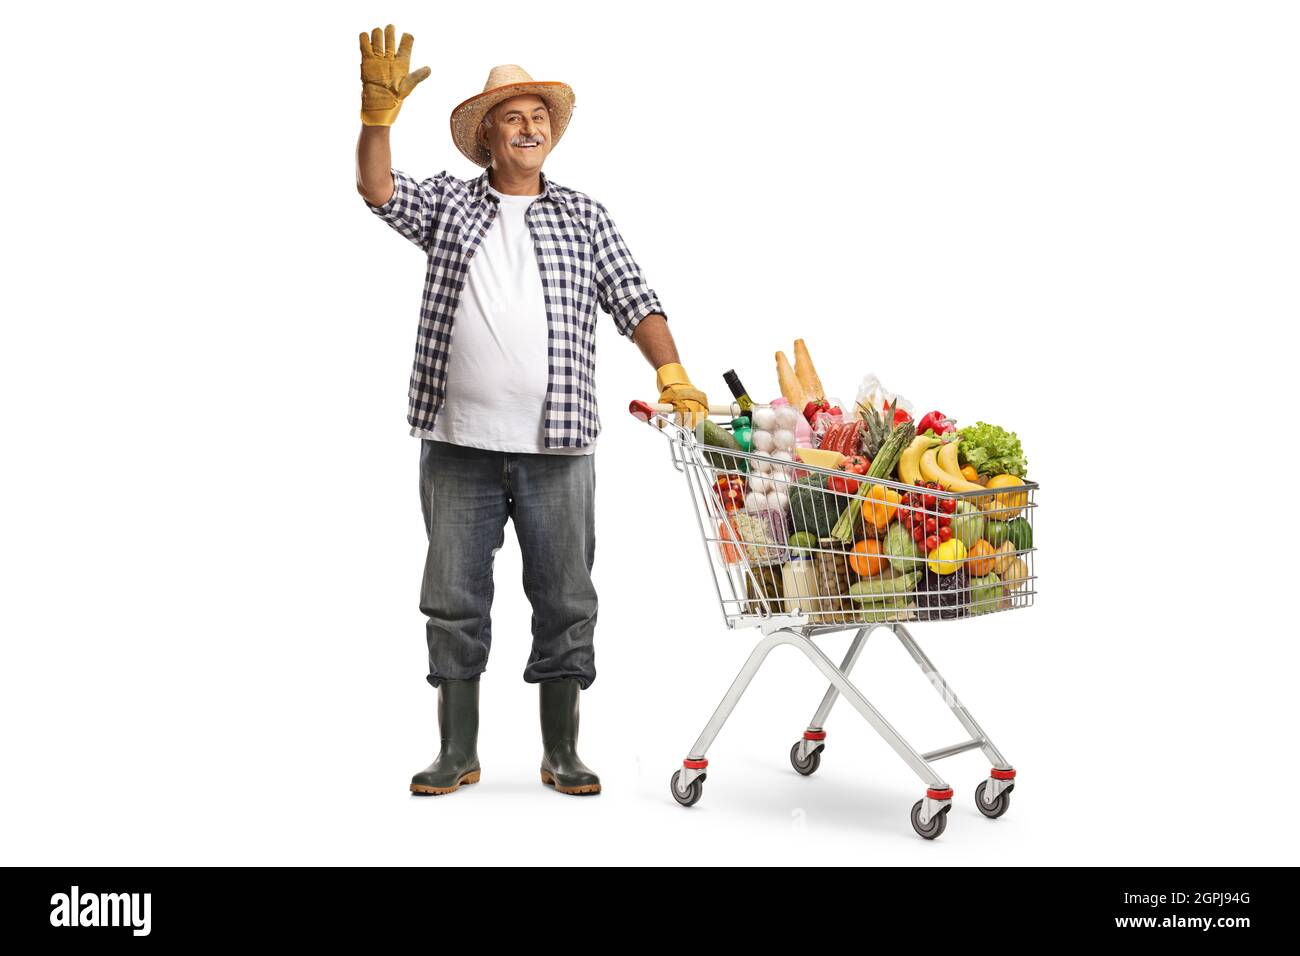 Full length portrait of a farmer with a shopping cart full of food products waving at camera isolated on white background Stock Photo